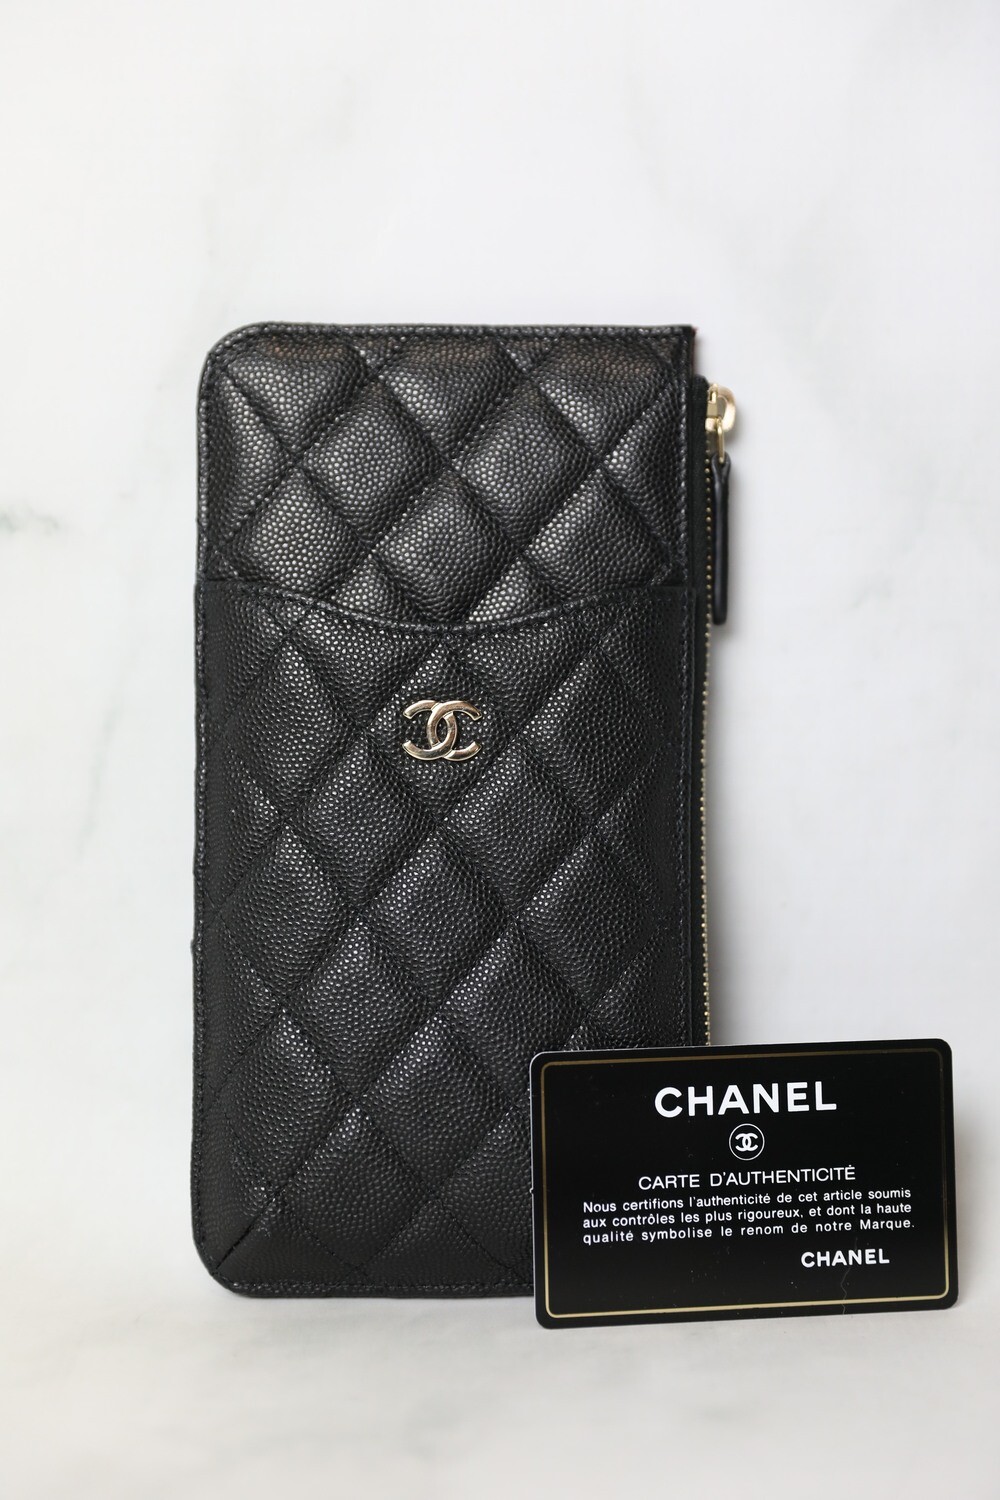 Chanel Phone Pouch Cardholder Wallet, Black caviar with Gold Hardware, Preowned in Box WA001